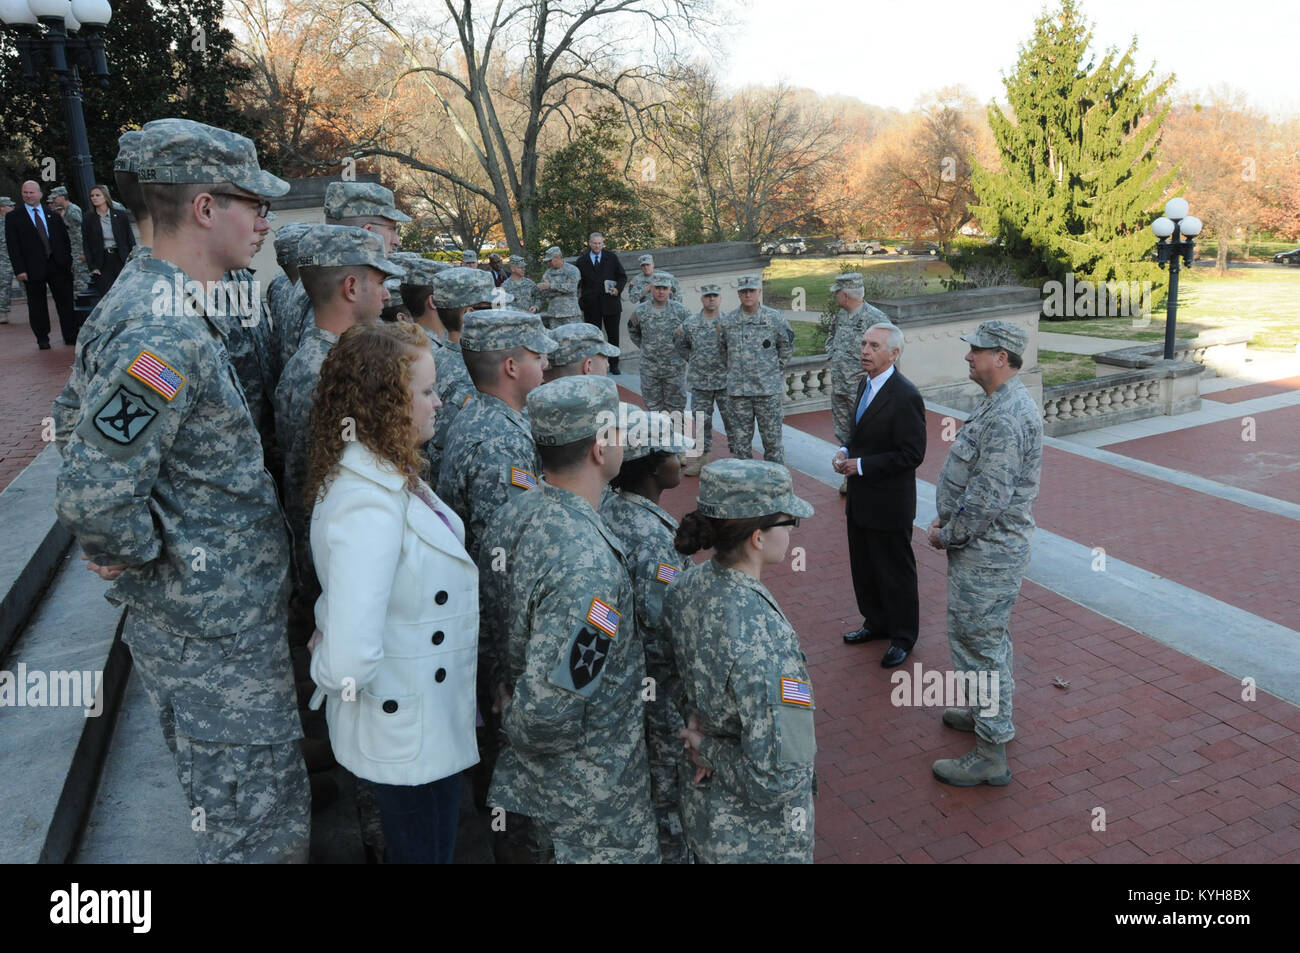 Kentucky Governor, Steve Beshear and the Adjutant General, Maj. Gen. Edward W. Tonini, speak to new Kentucky Guard recruits on the steps of the State Capitol in Frankfort, Ky., Nov. 20, 2012. (Kentucky National Guard photo by Sgt. Scott Raymond) Stock Photo